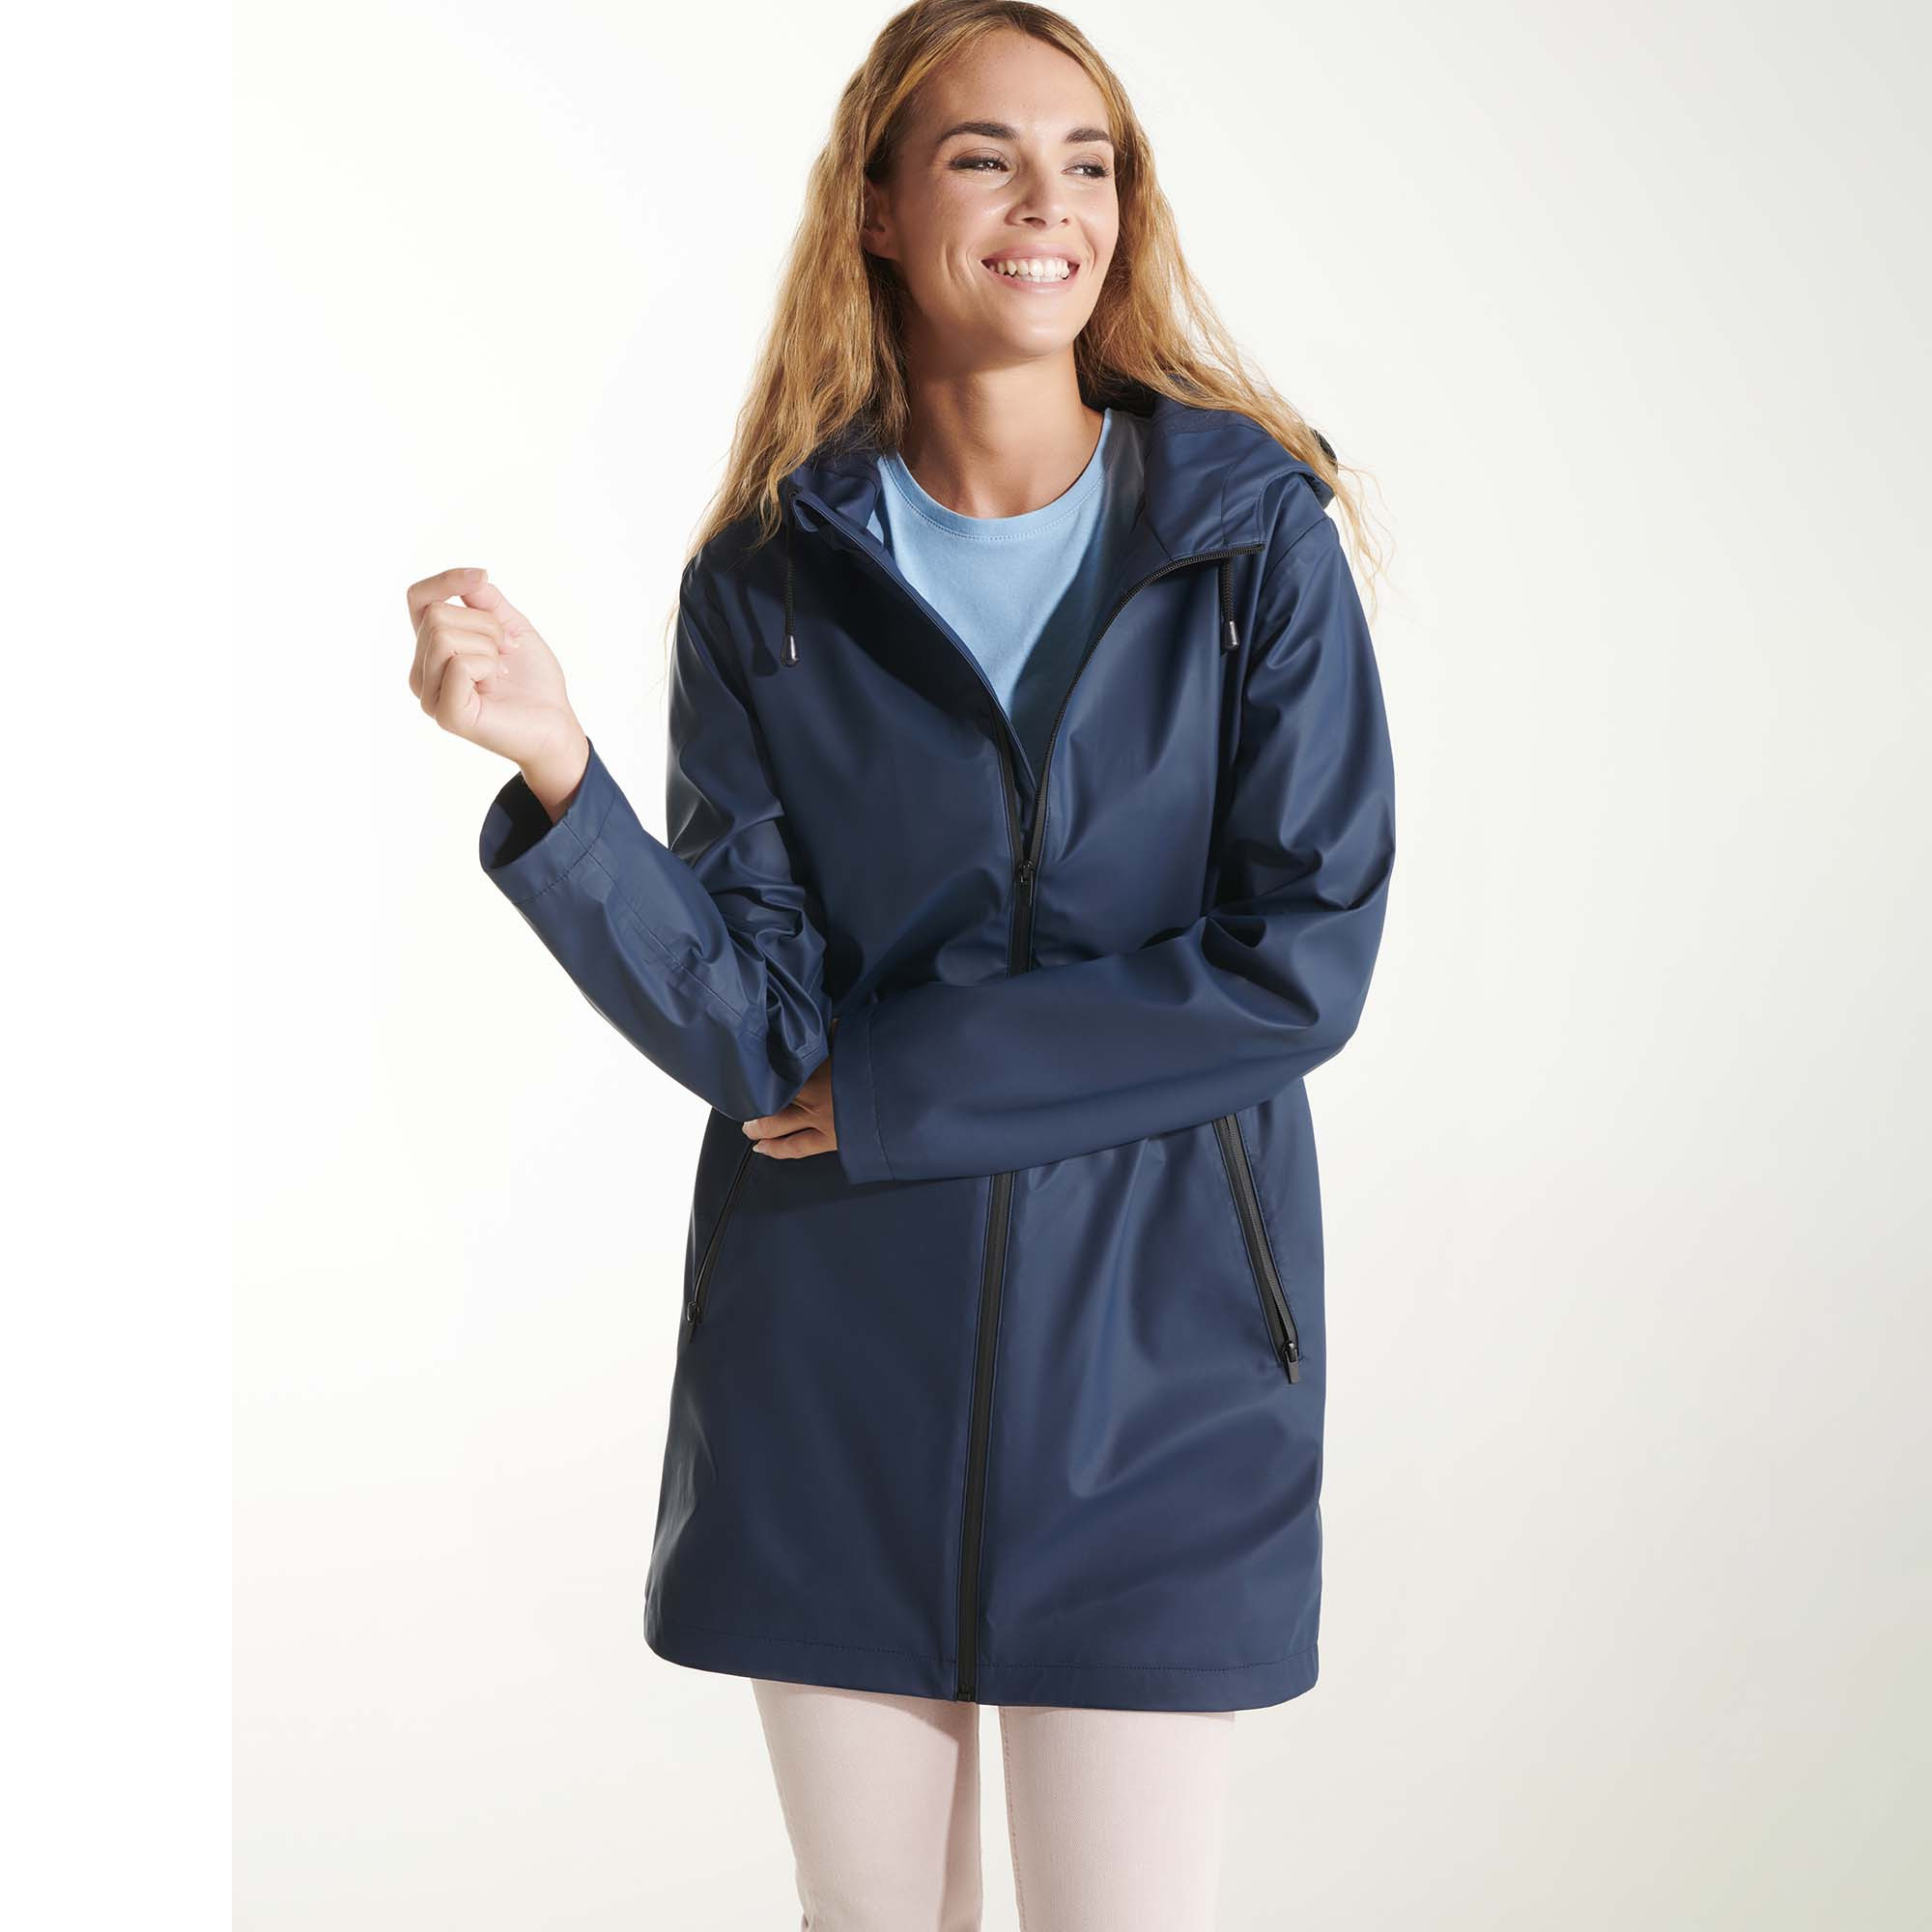 Chubasquero Impermeable Mujer ROLY 5202 Sitka Woman, compra online